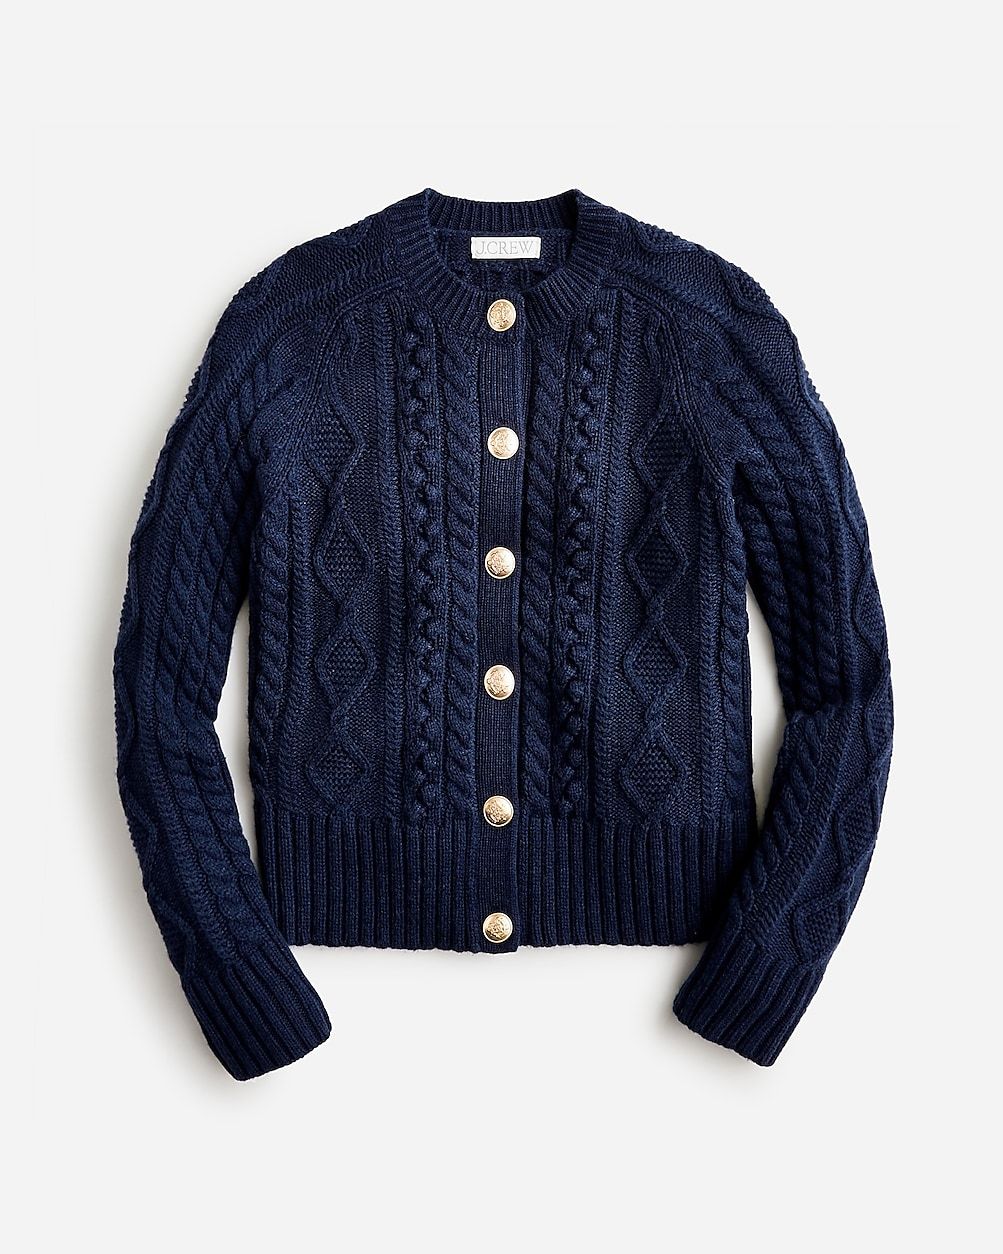 top rated4.4(162 REVIEWS)Cable-knit cardigan sweater$119.99$138.00 (13% Off)Extra 30% off sale st... | J.Crew US